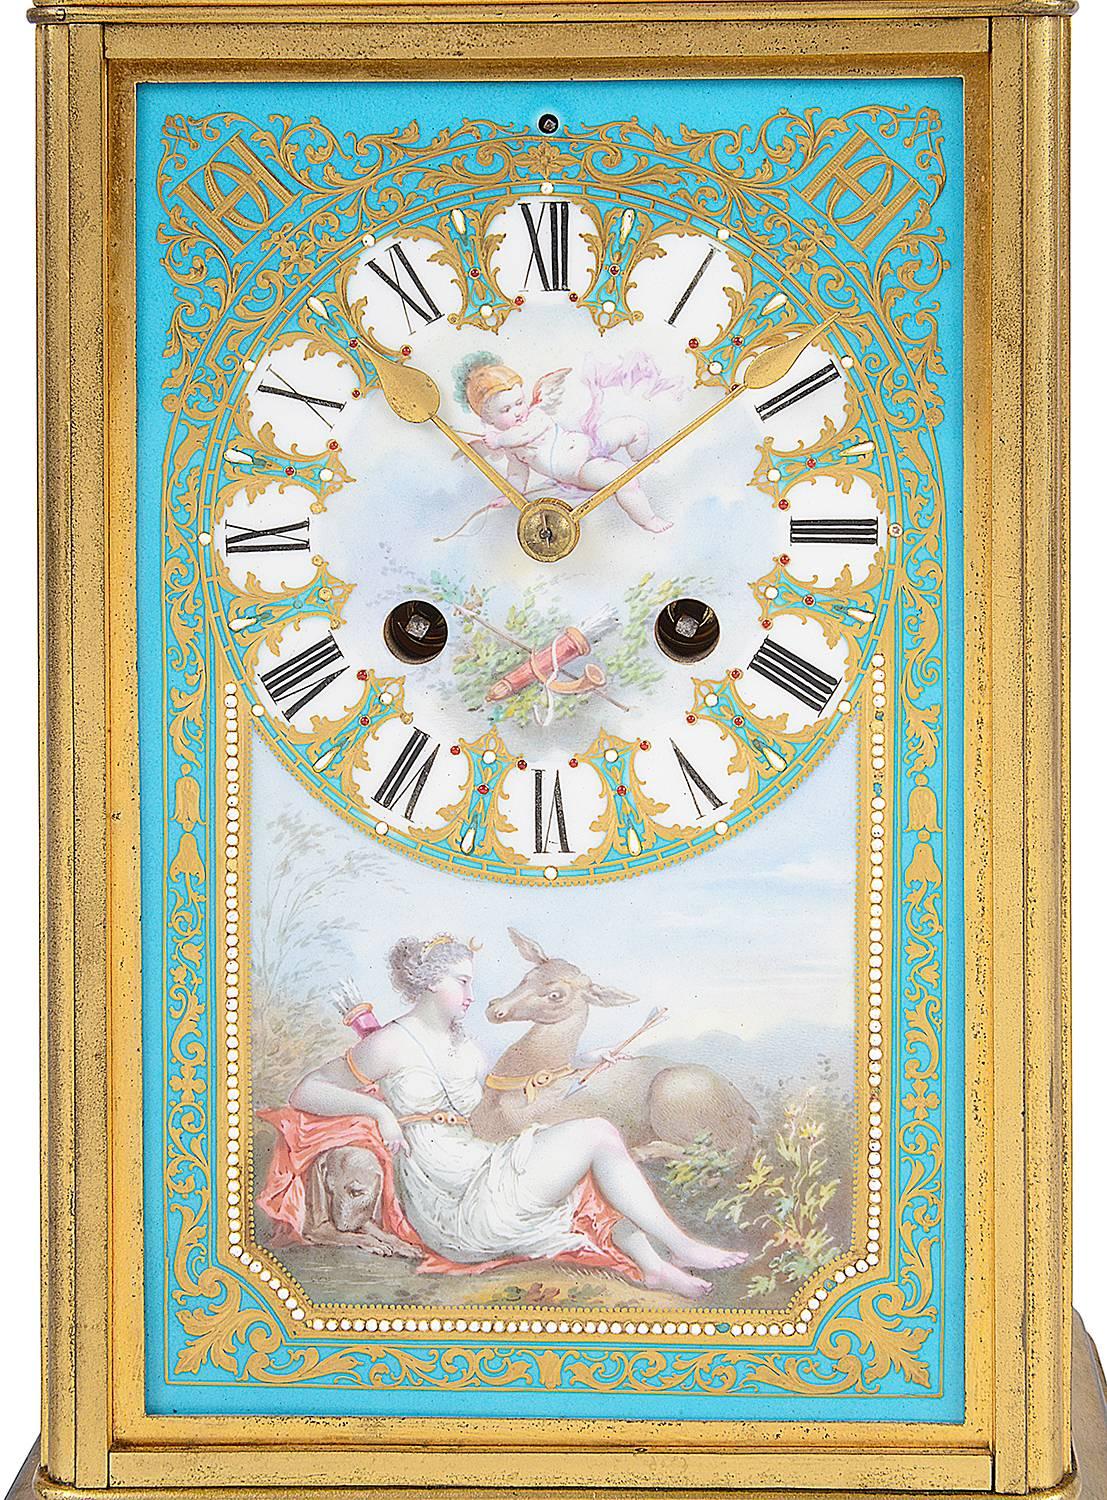 An unusual and very good quality 19th century French Sèvres style porcelain and gilded ormolu mantel clock. Having a domed top with a painted scene of a child playing a horn set in a turquoise ground with gilded decoration. The porcelain clock face